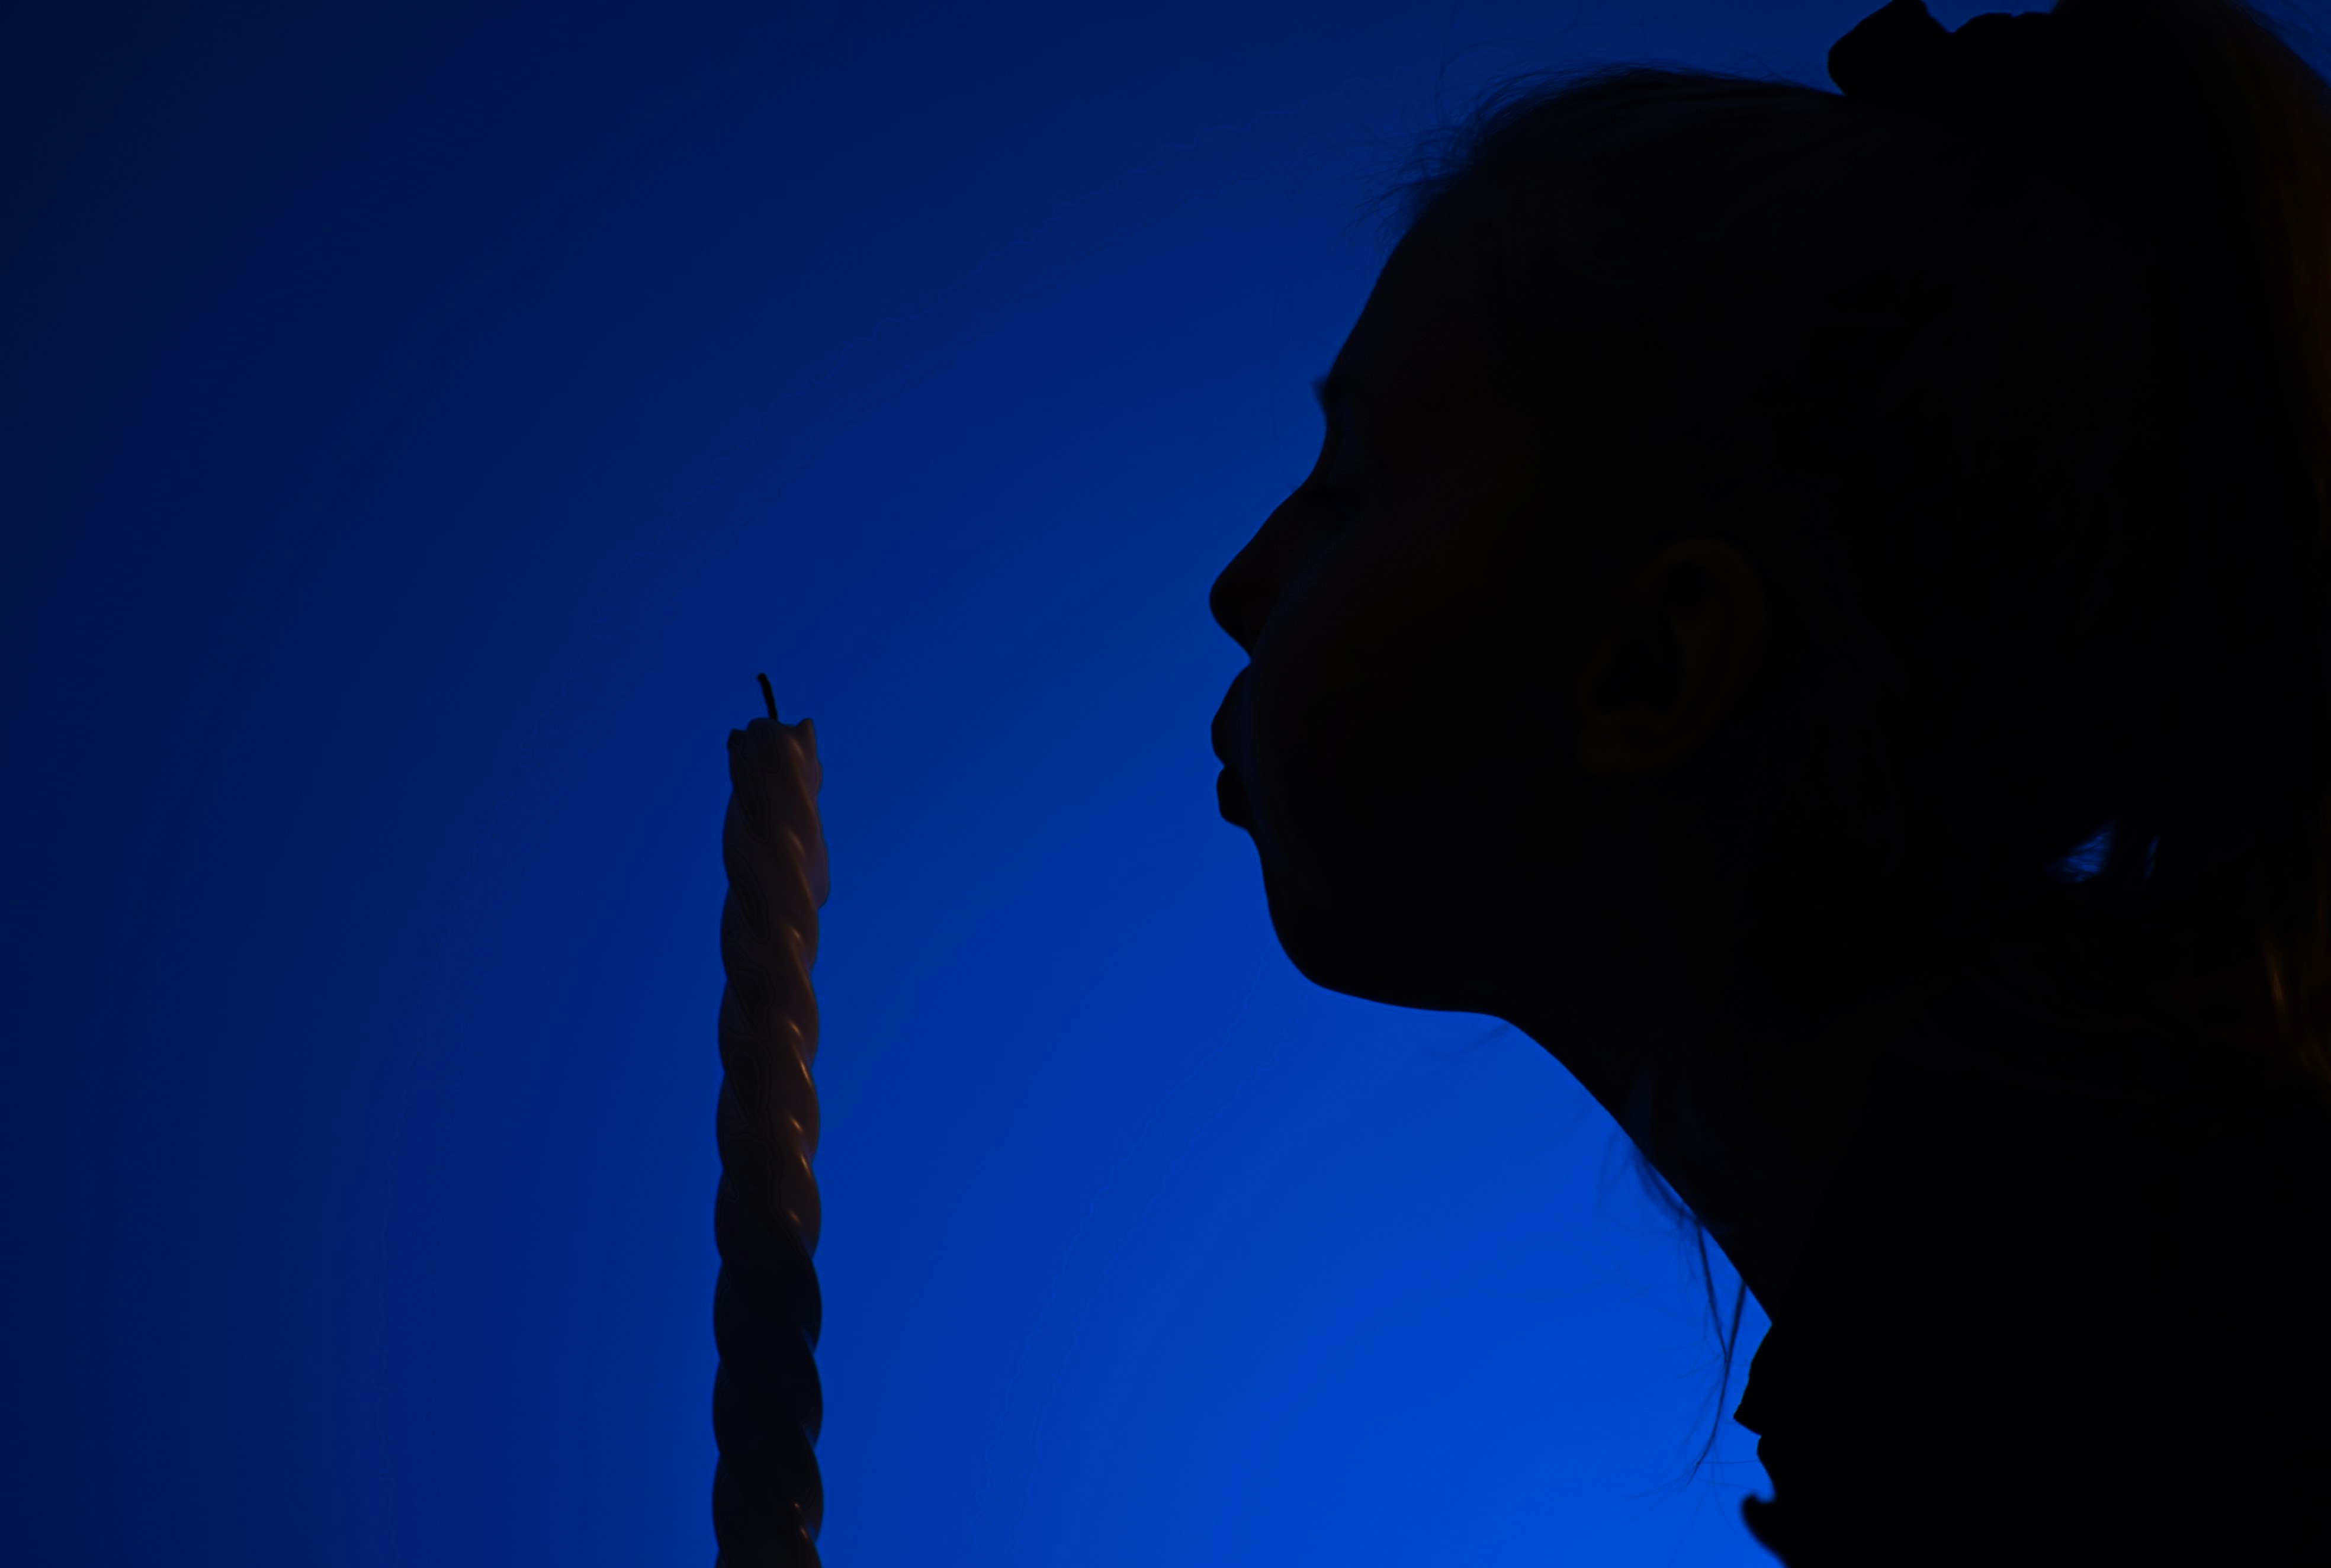 Silhouette of a young girl that just blew out a candle